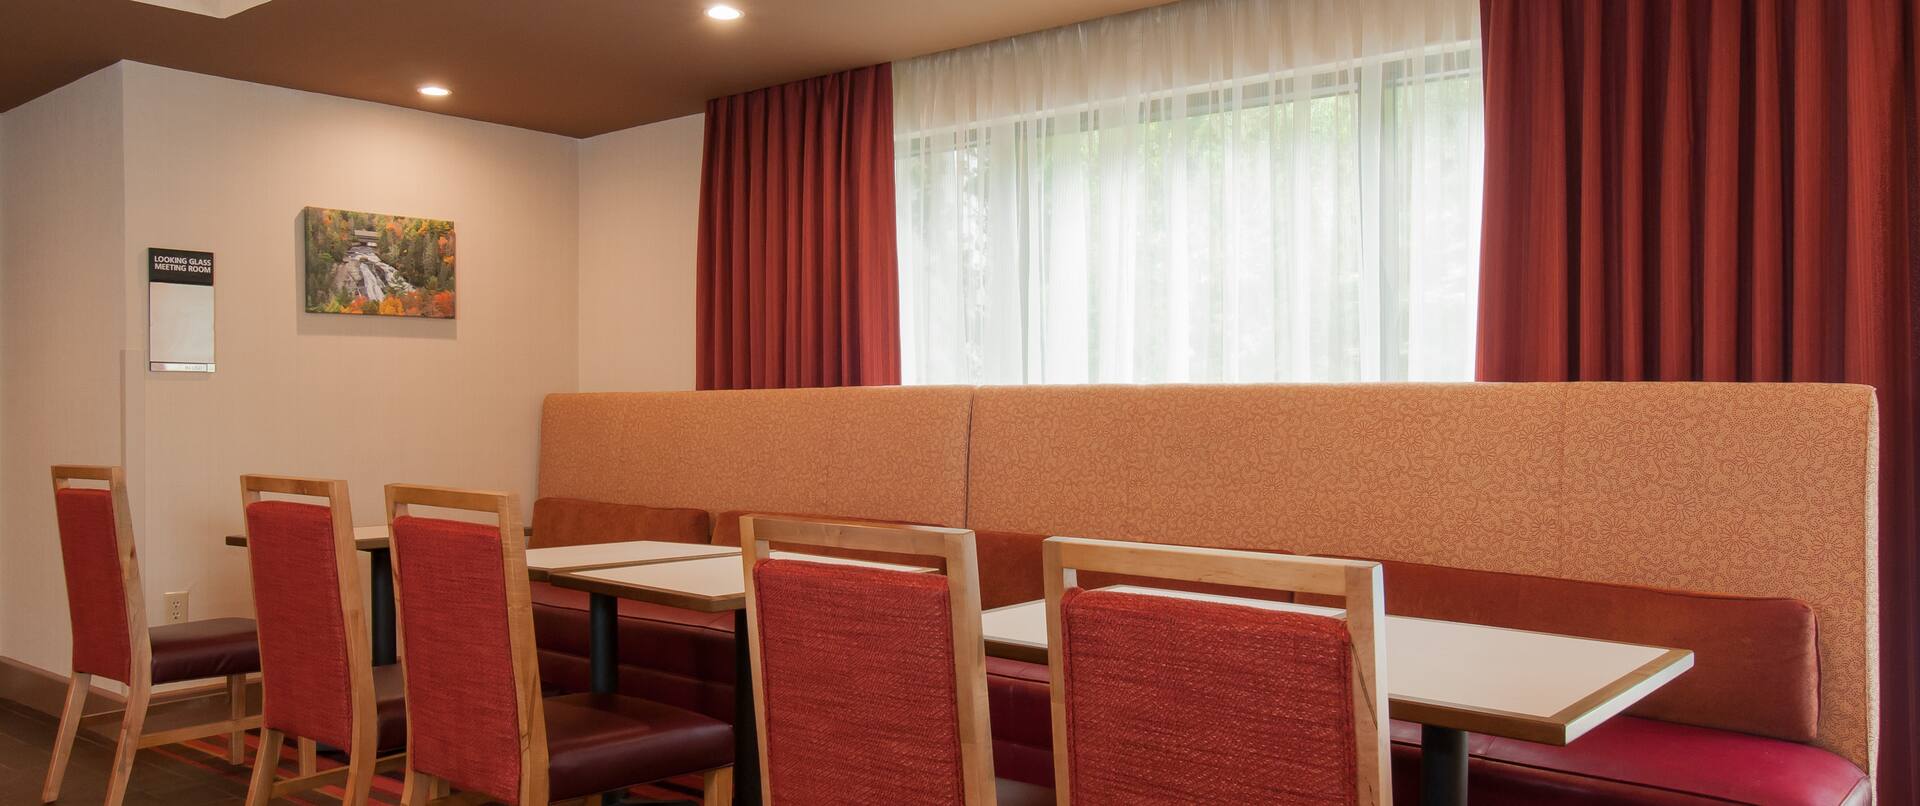 Banquette Seating in Dining Area